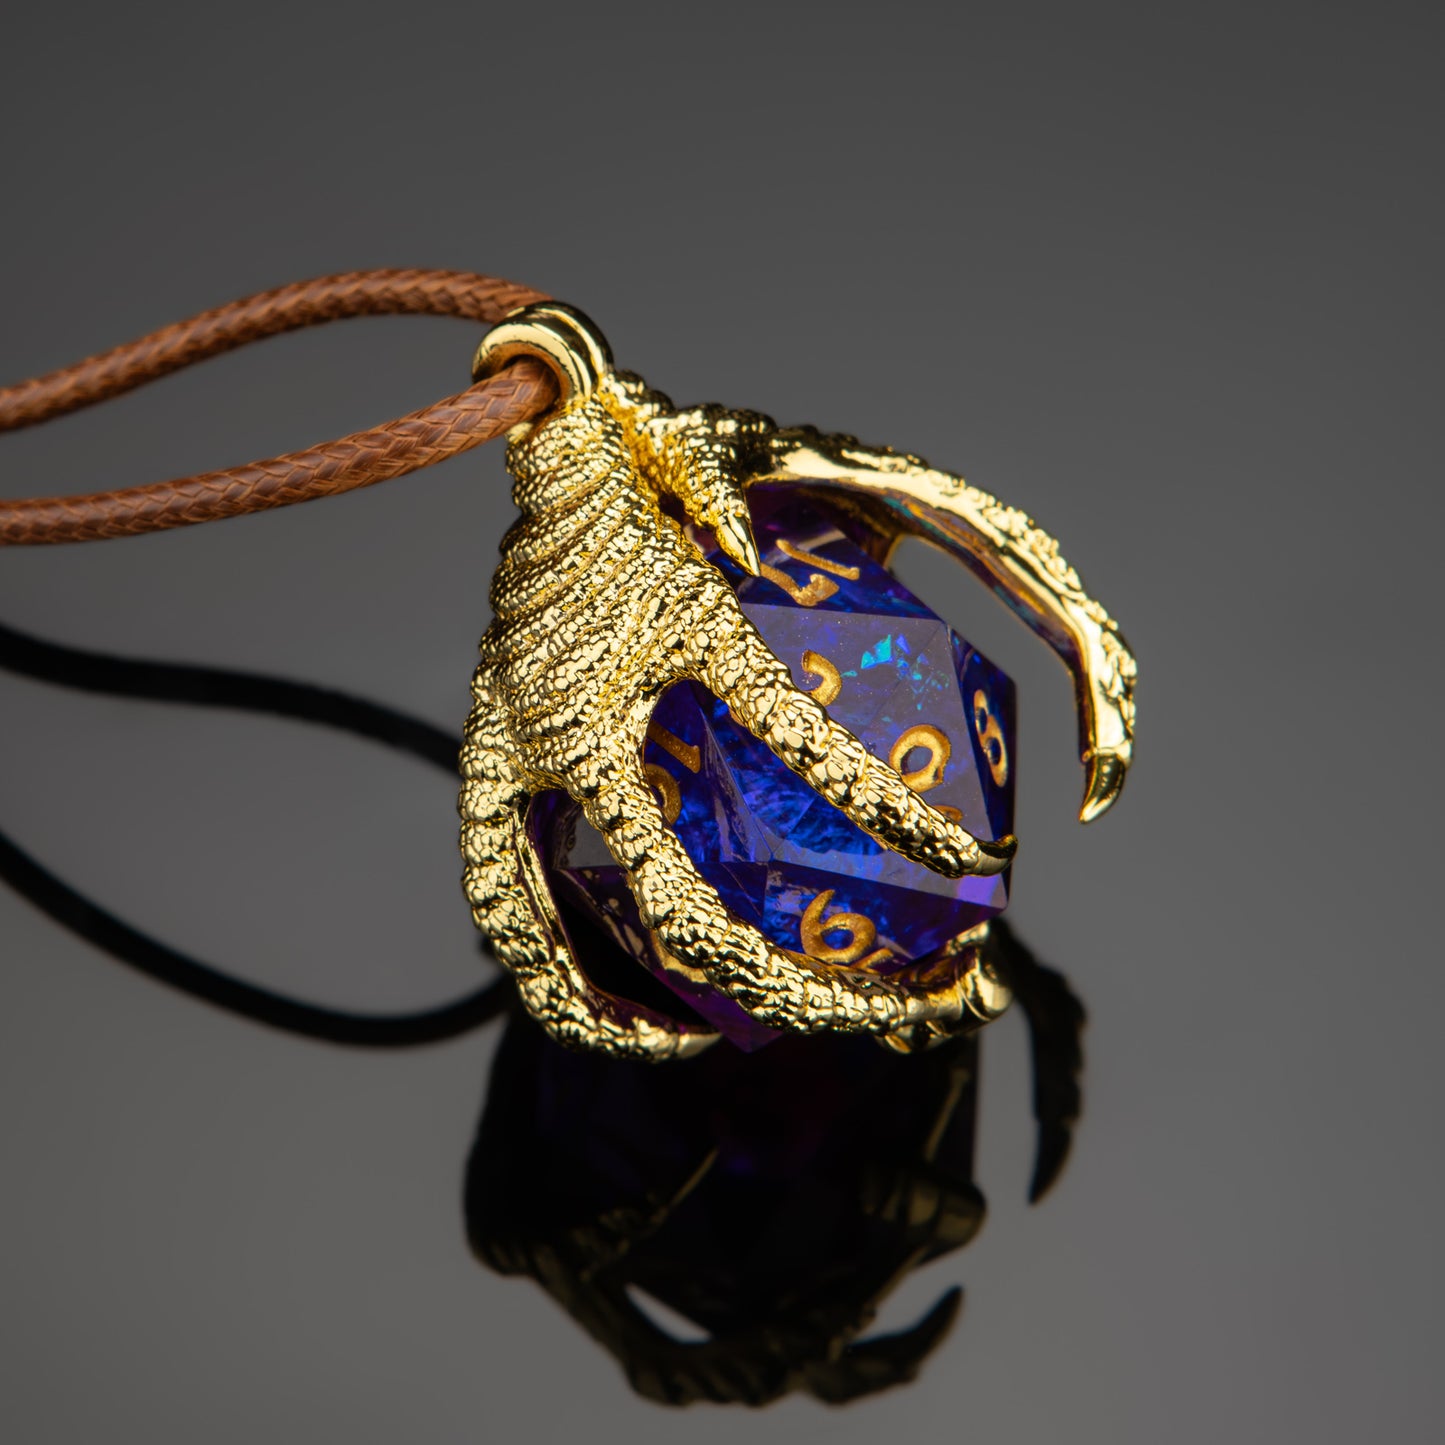 Dragon's claw necklace with random sharp resin D20s-Gold